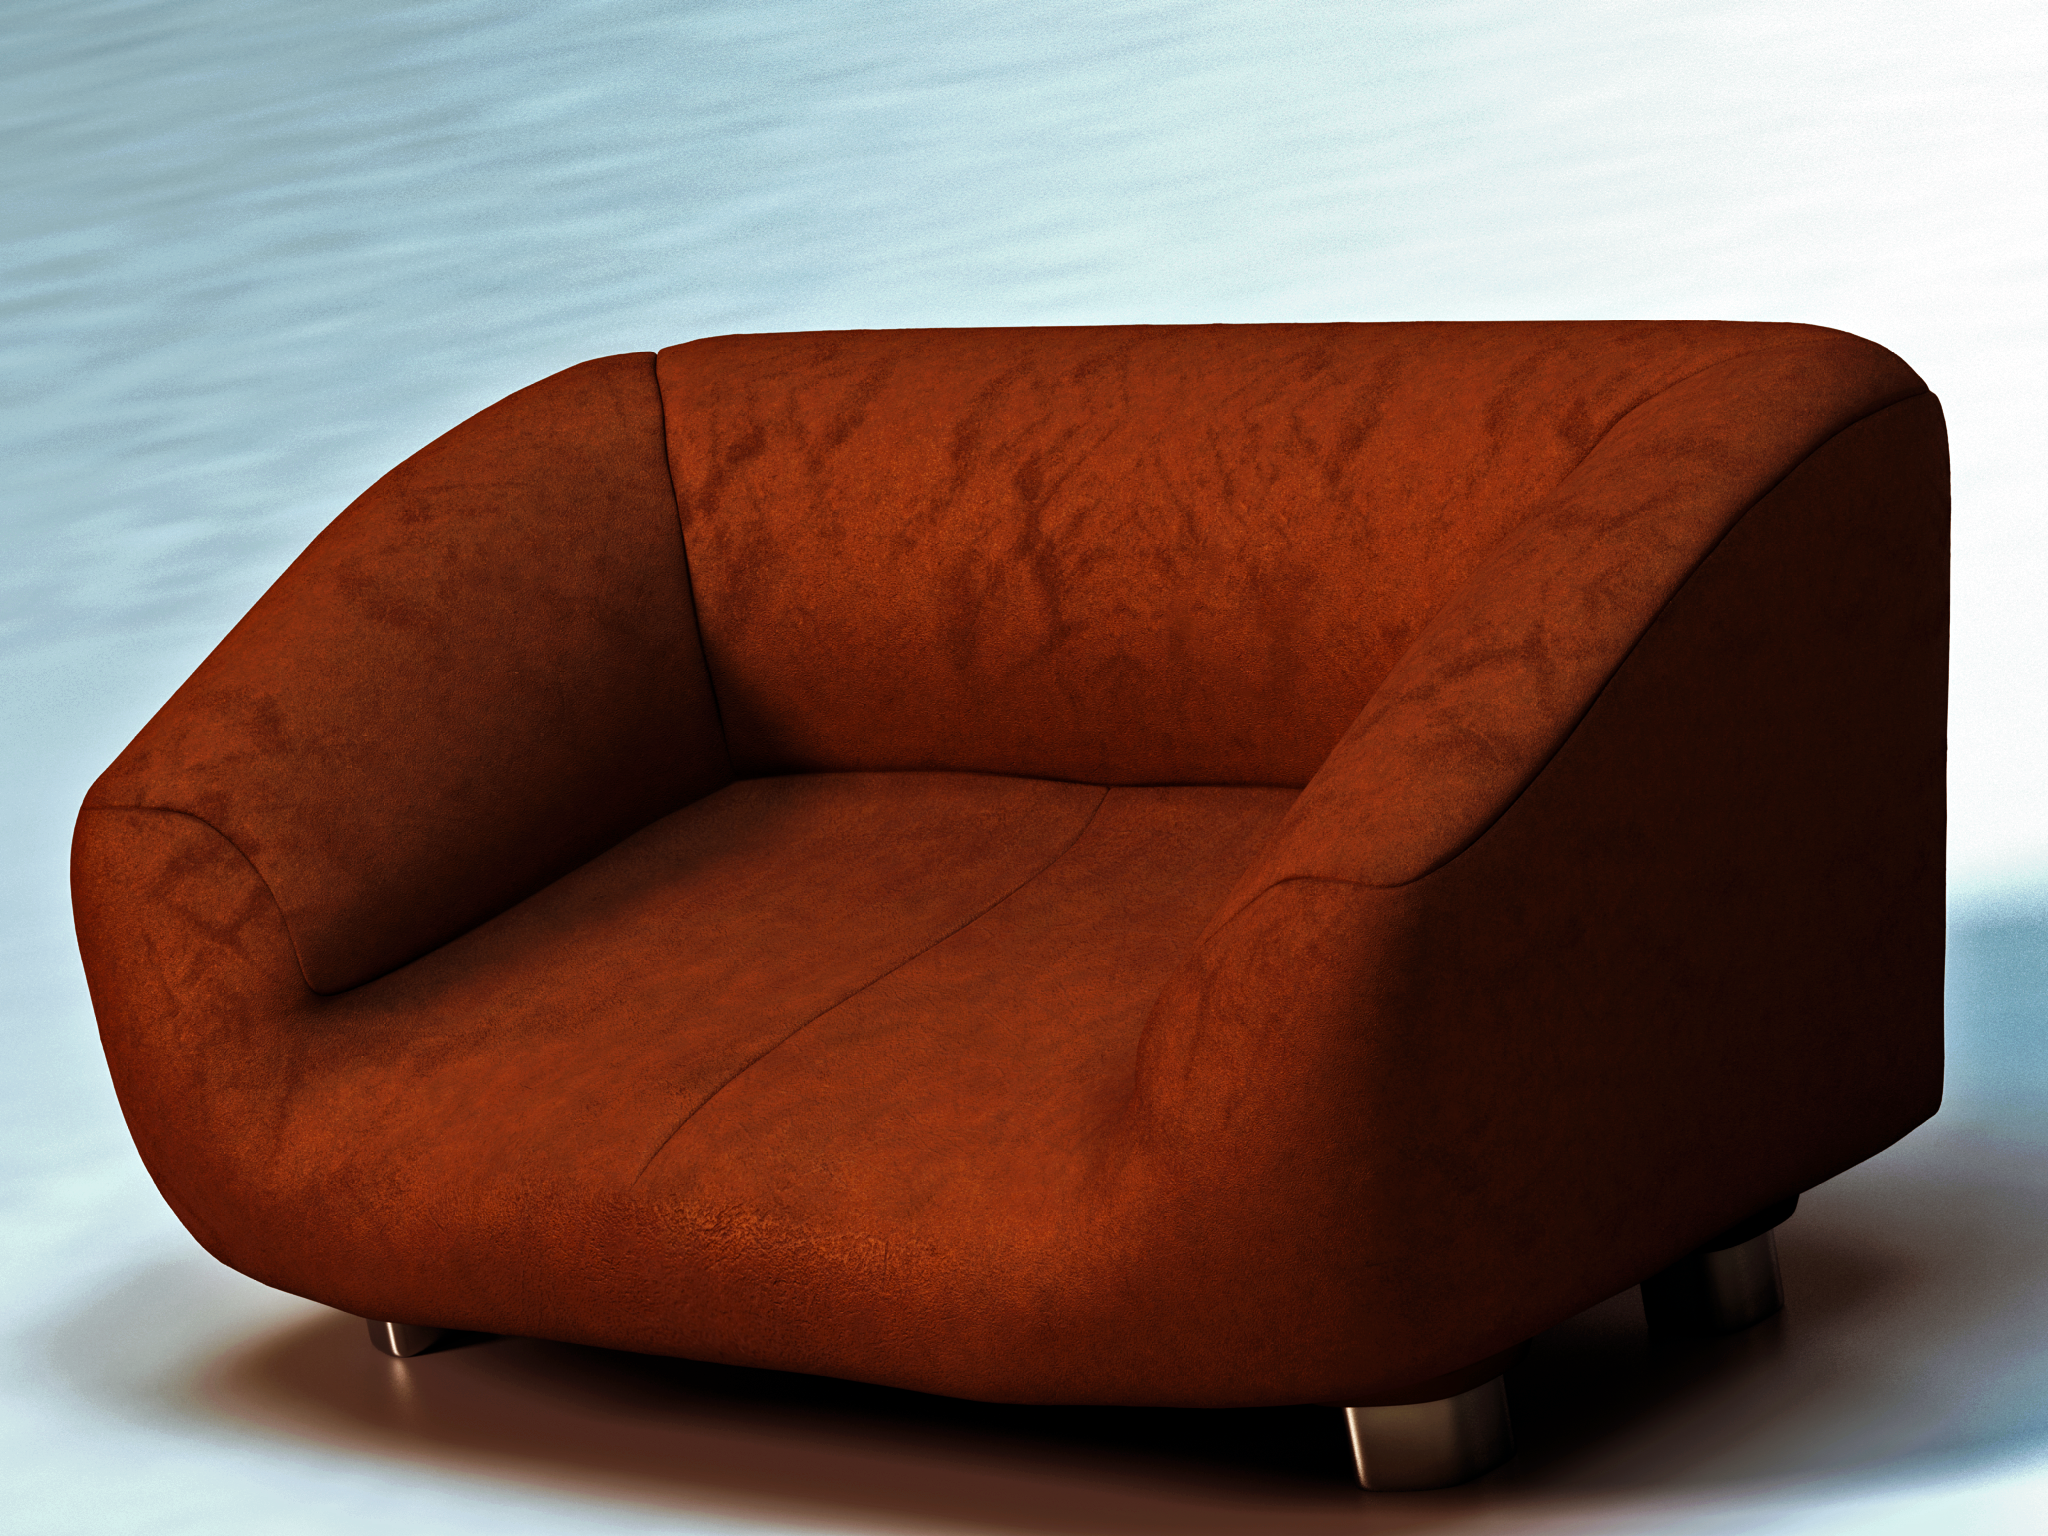 Couch by Ke7dbx, on Flickr